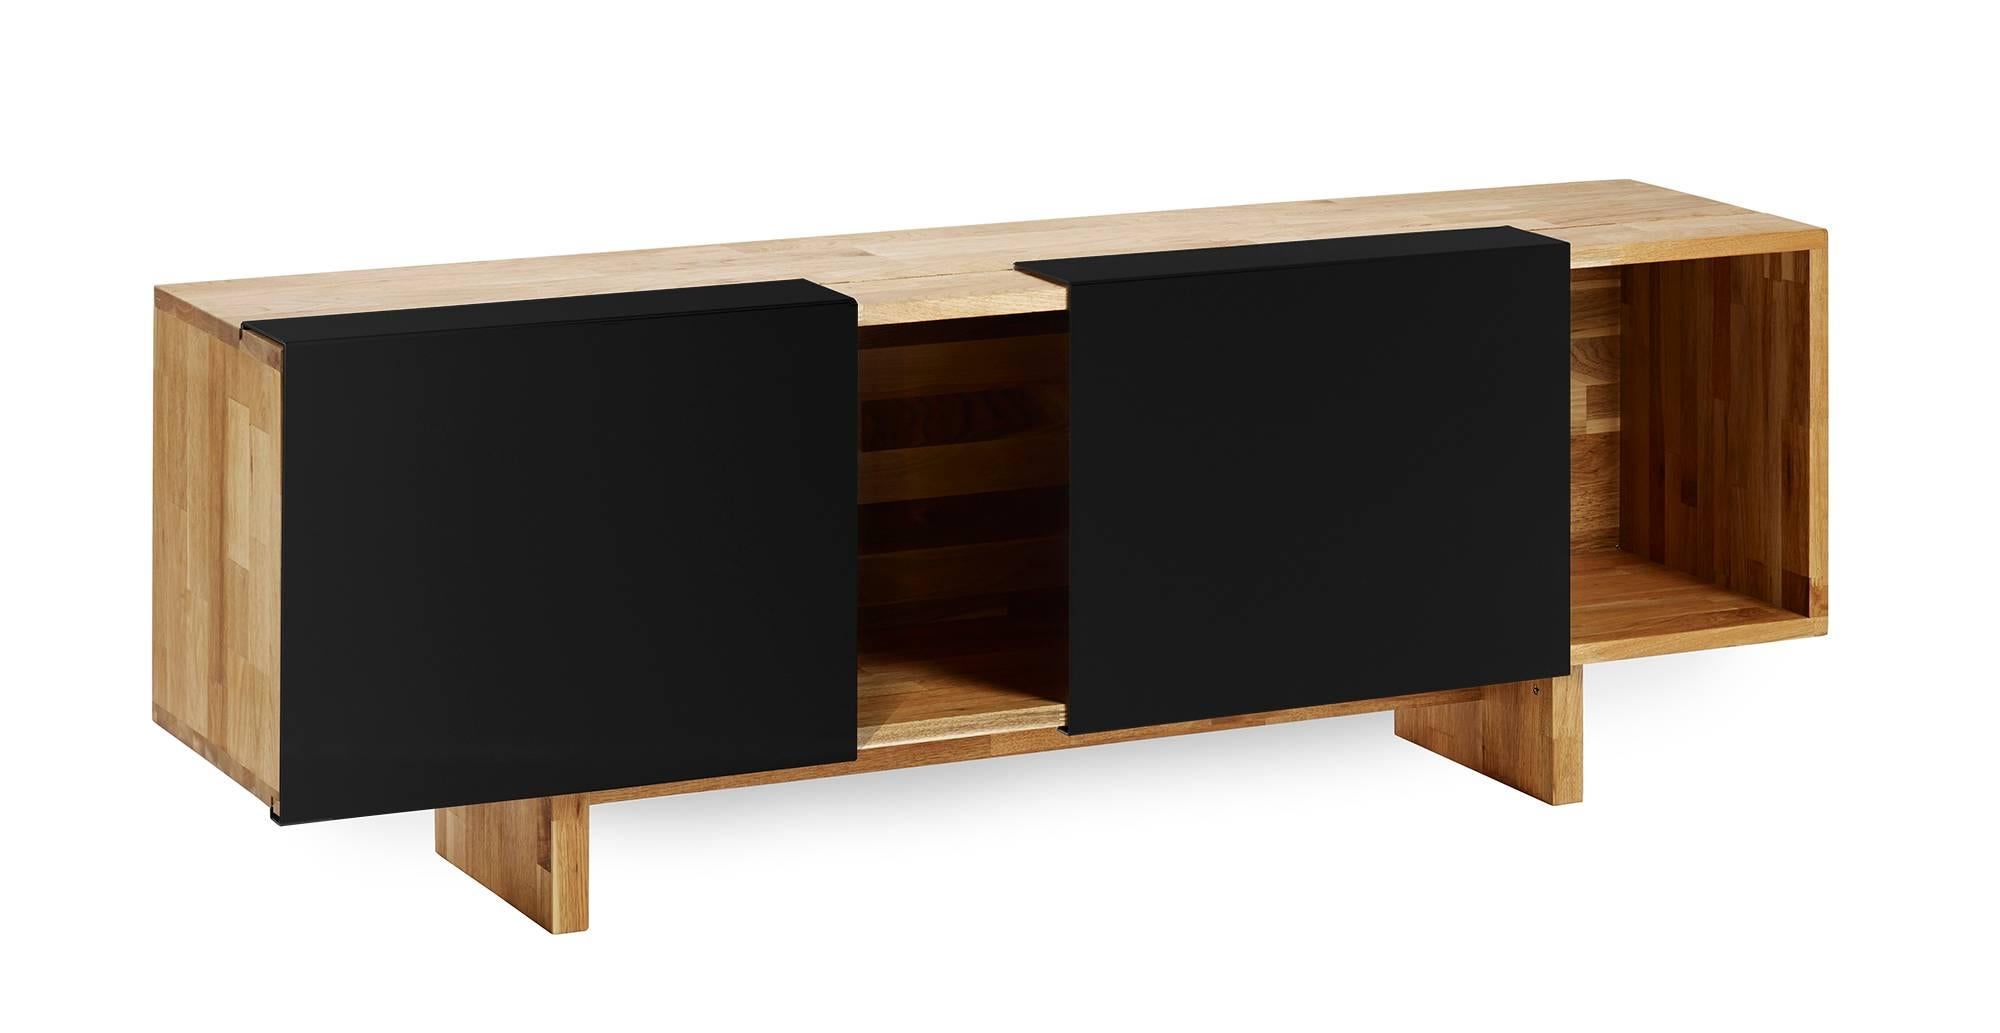 Drilling into walls isn't for everyone, but that doesn't mean you can't have the LAXseries three shelf. Our take on the credenza sits console style and has just the right amount of space to store everything you need. Made from solid English walnut